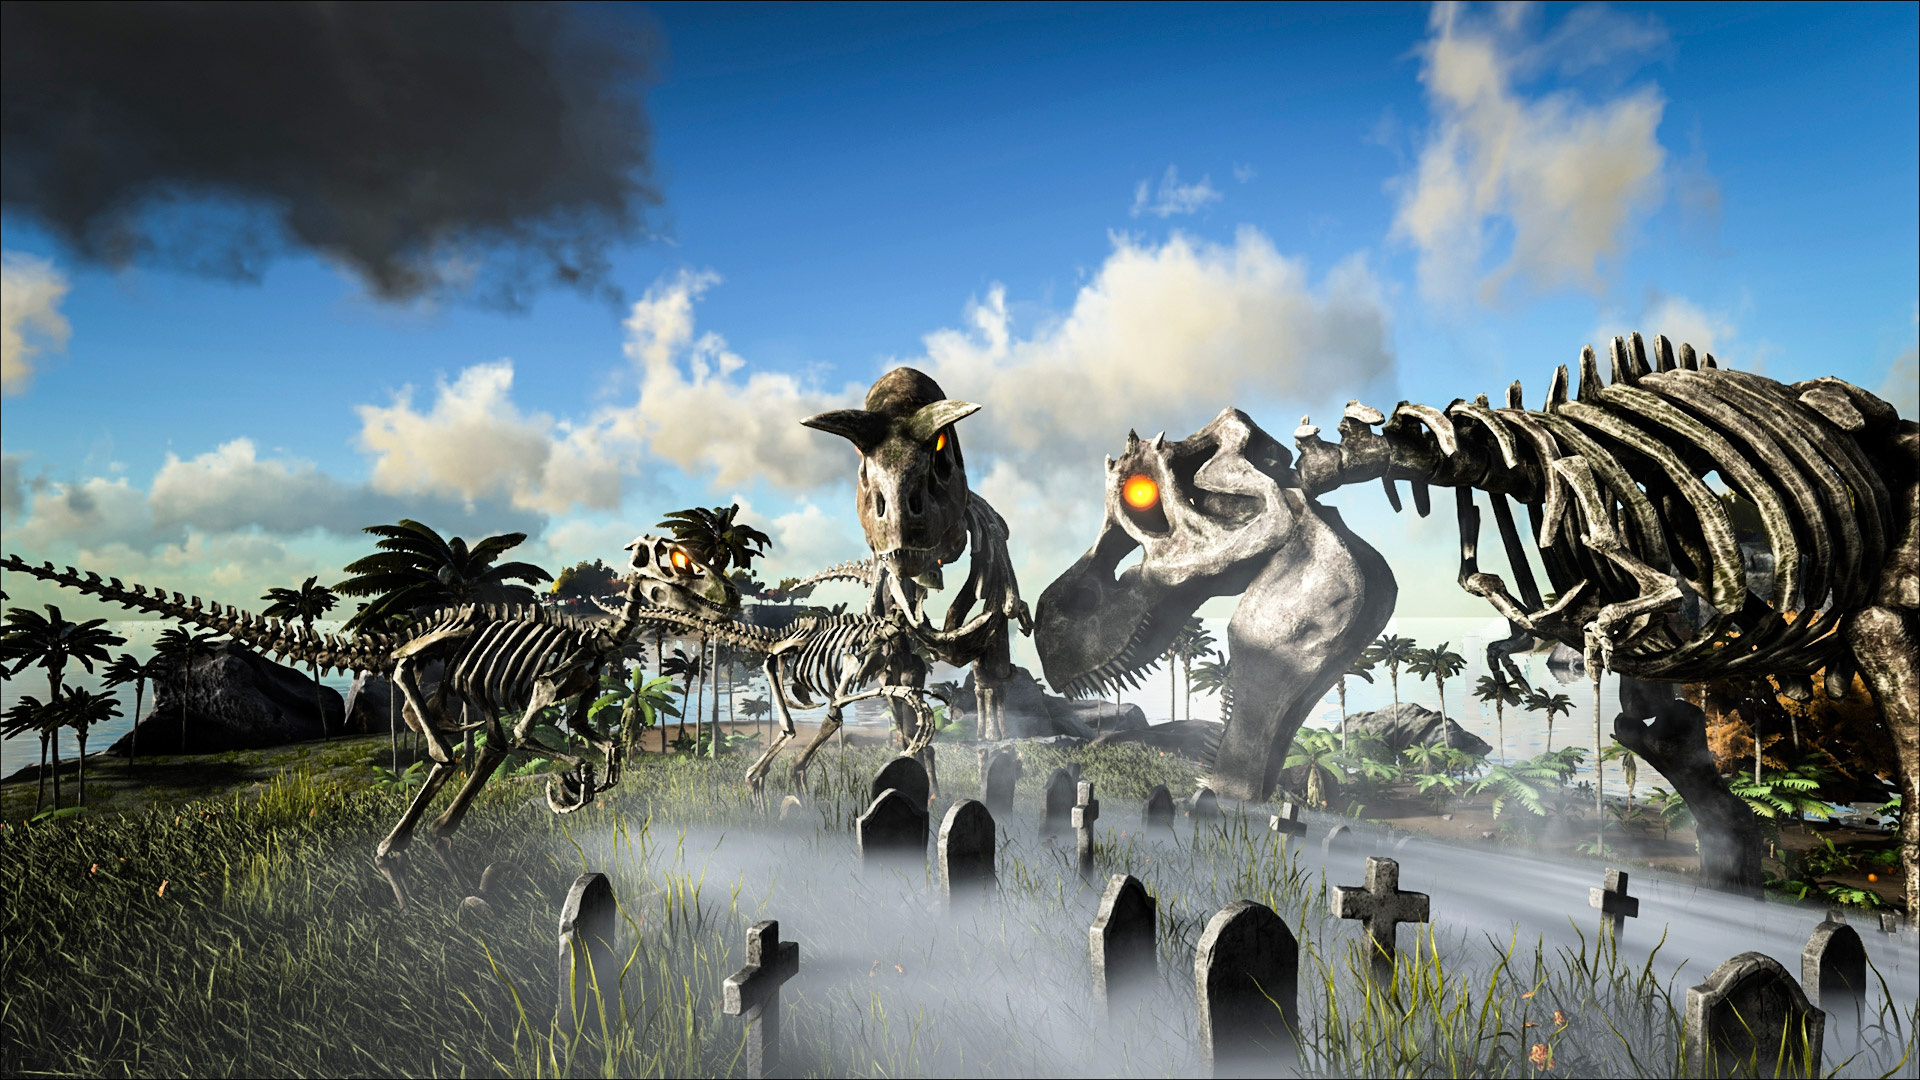 ARK: Survival Evolved: Fear Evolved, A Halloween event, Started on October 28, 2015. 1920x1080 Full HD Wallpaper.